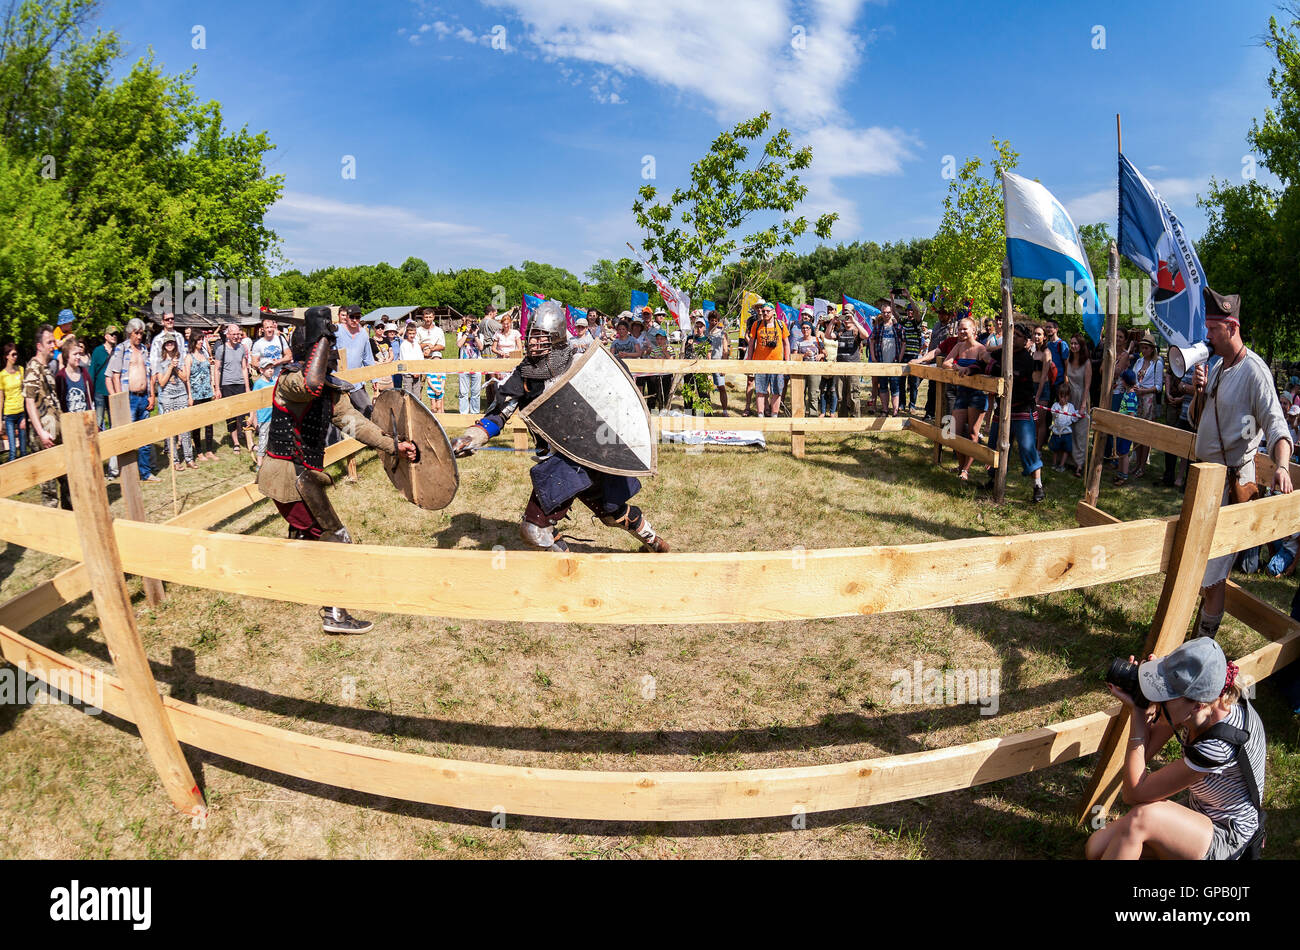 Historical restoration of knightly fights on free festival of medieval culture Stock Photo